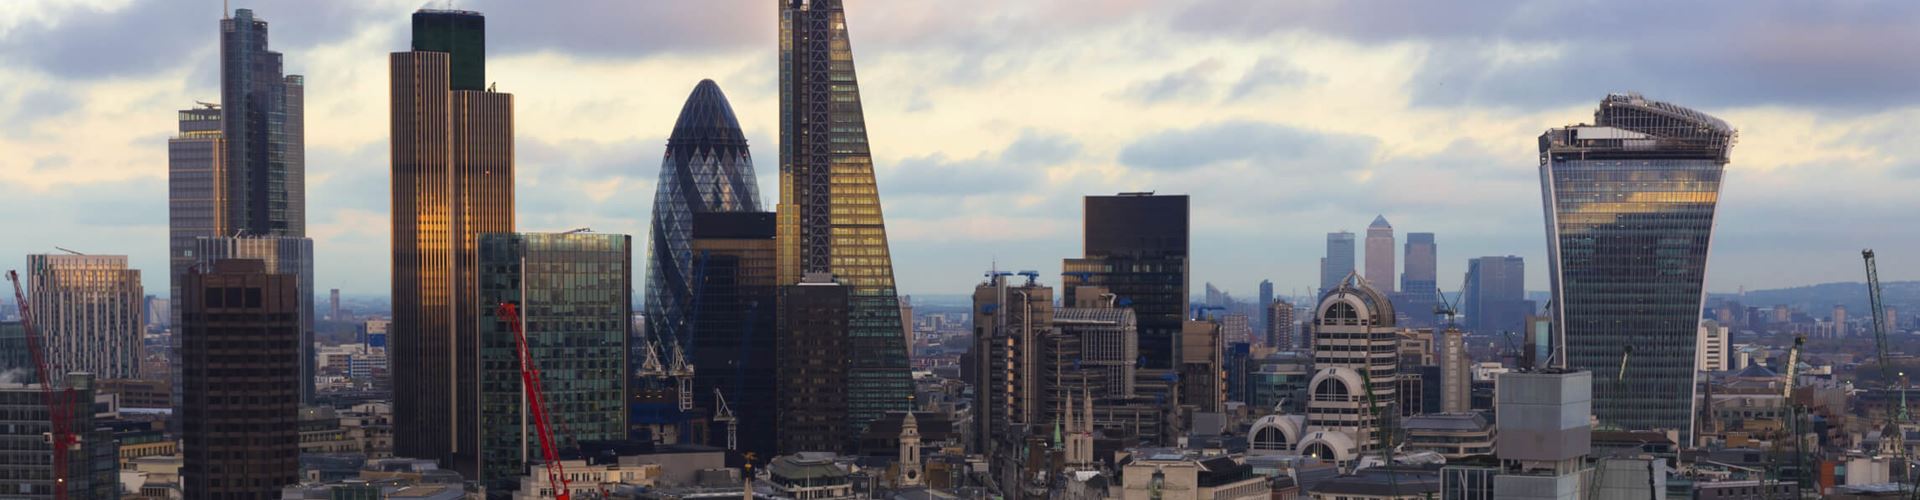 London finance workers earn £20,000 more than rest of UK, reveals study